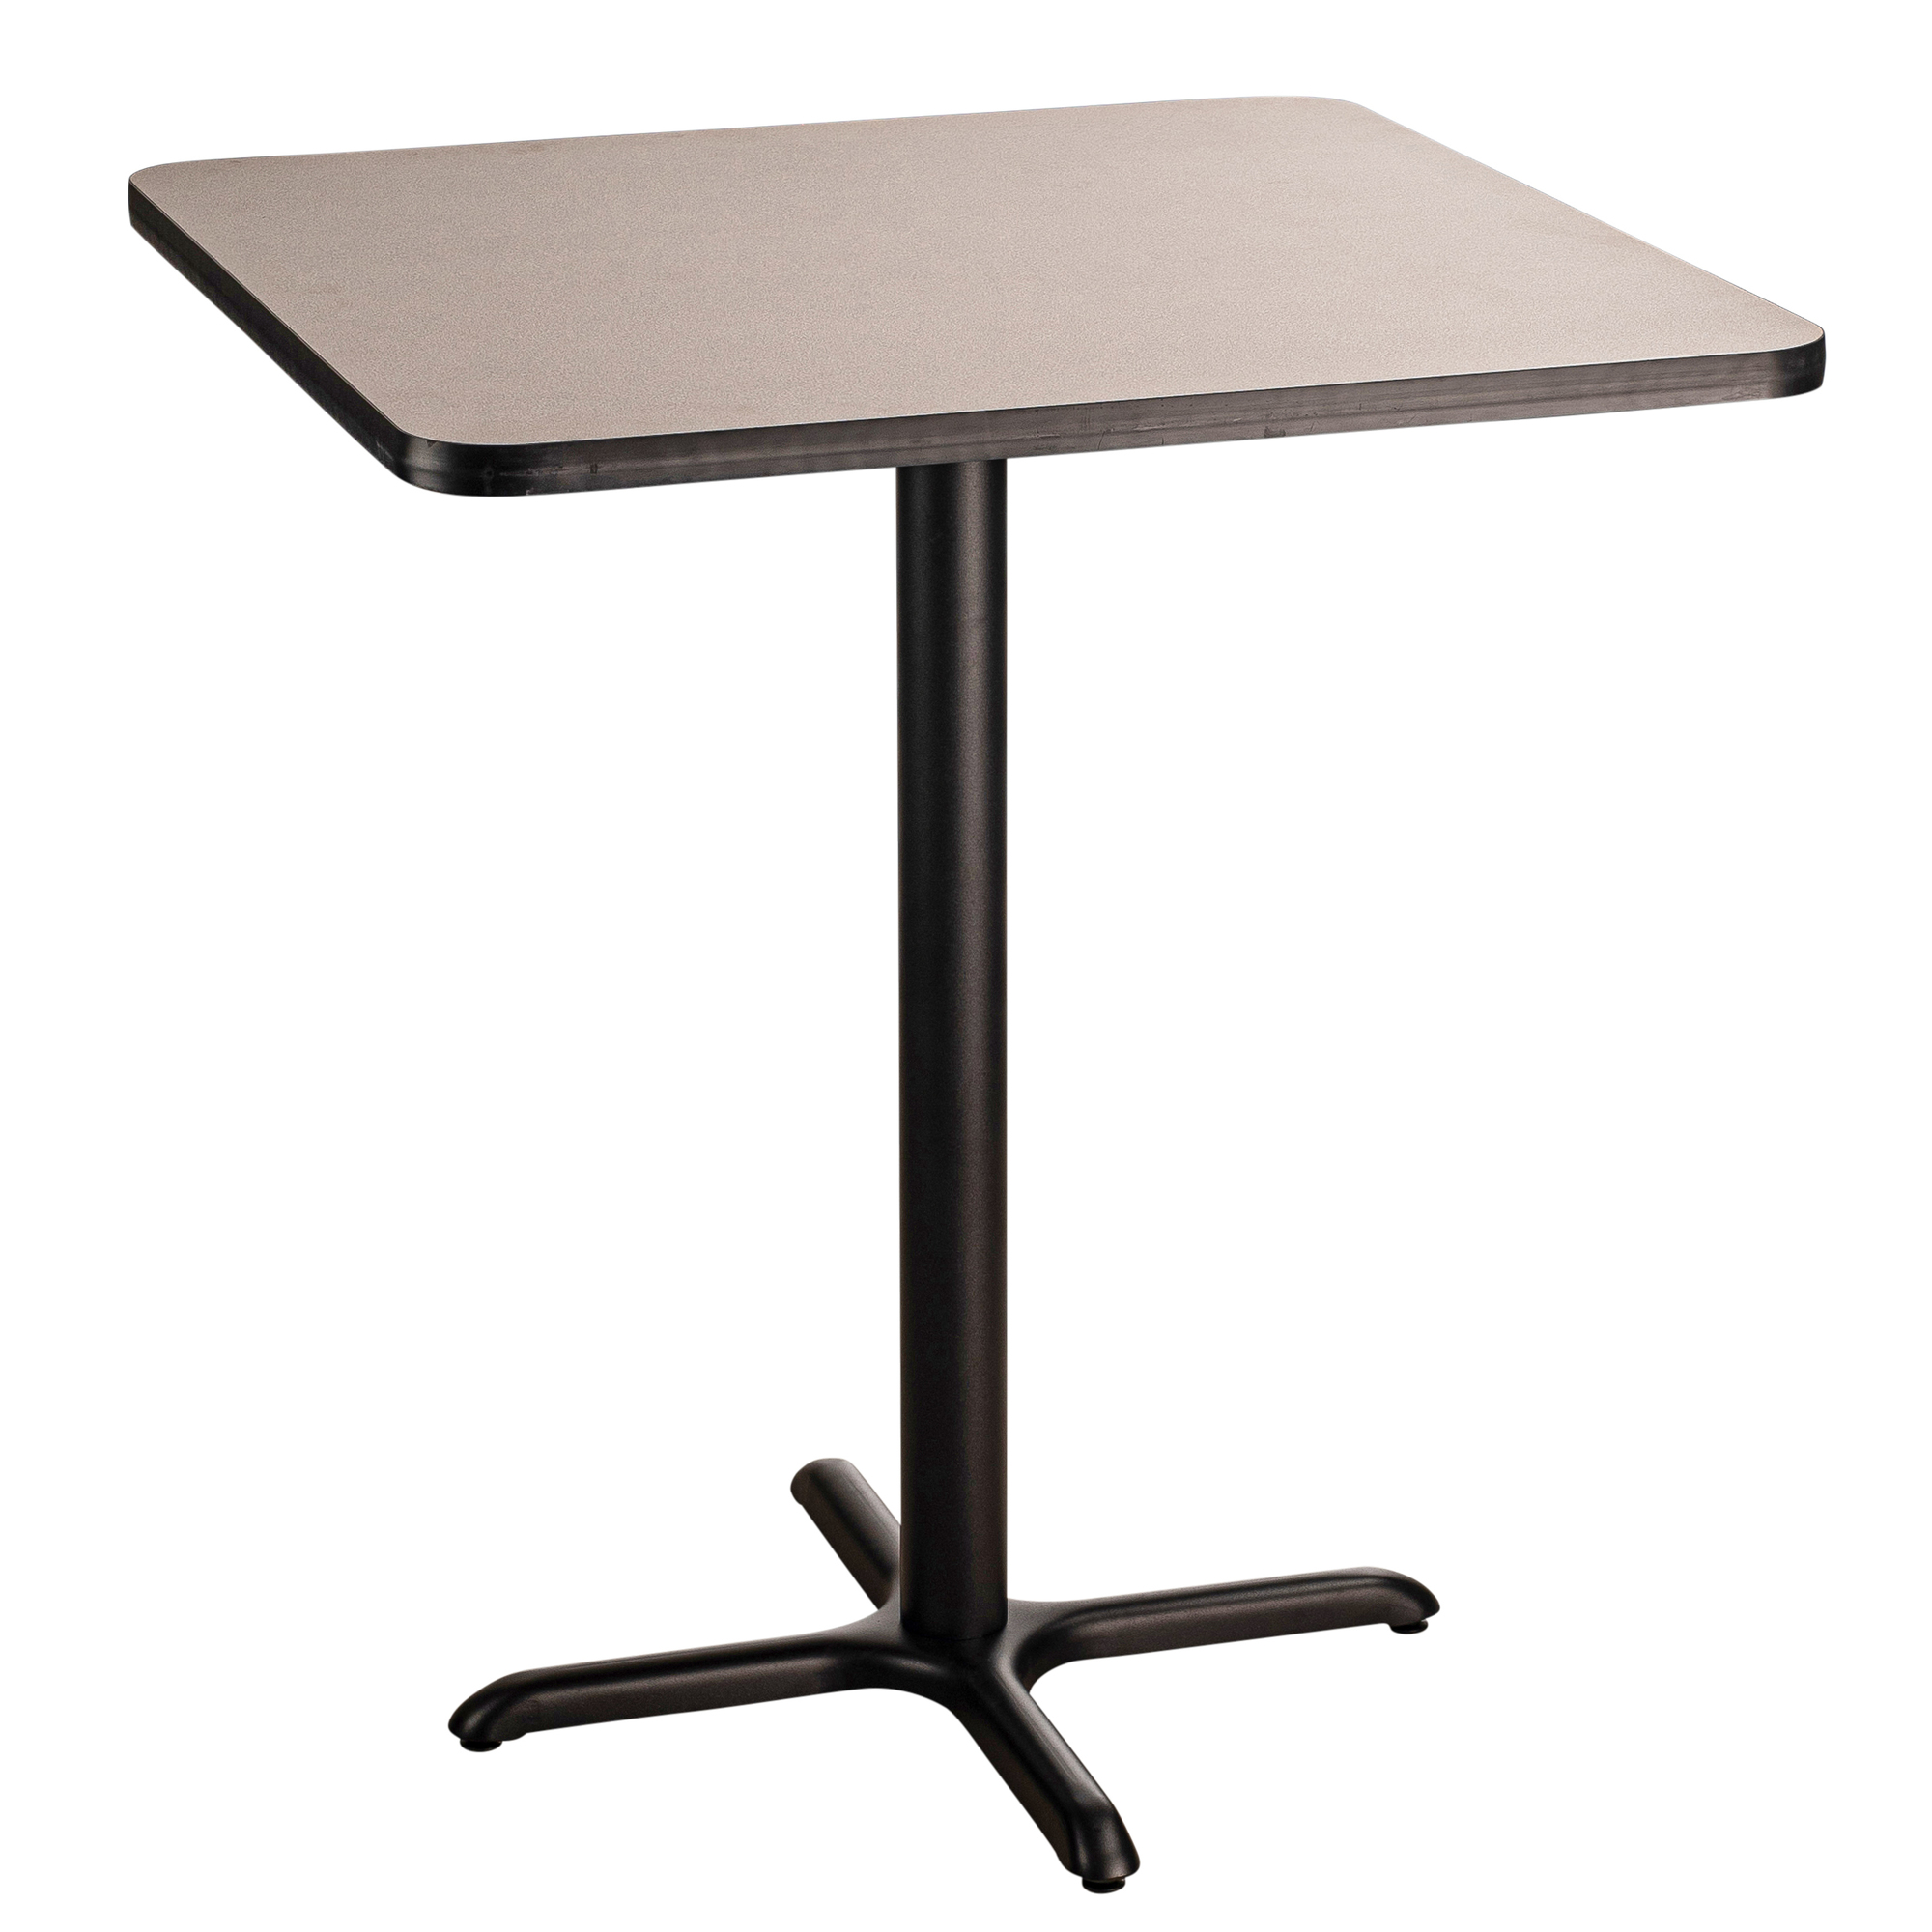 "National Public Seating, Cafe Table, 36x36x42 Square ""X"" Base, Height 42 in, Model CT33636XBPBTMGY"